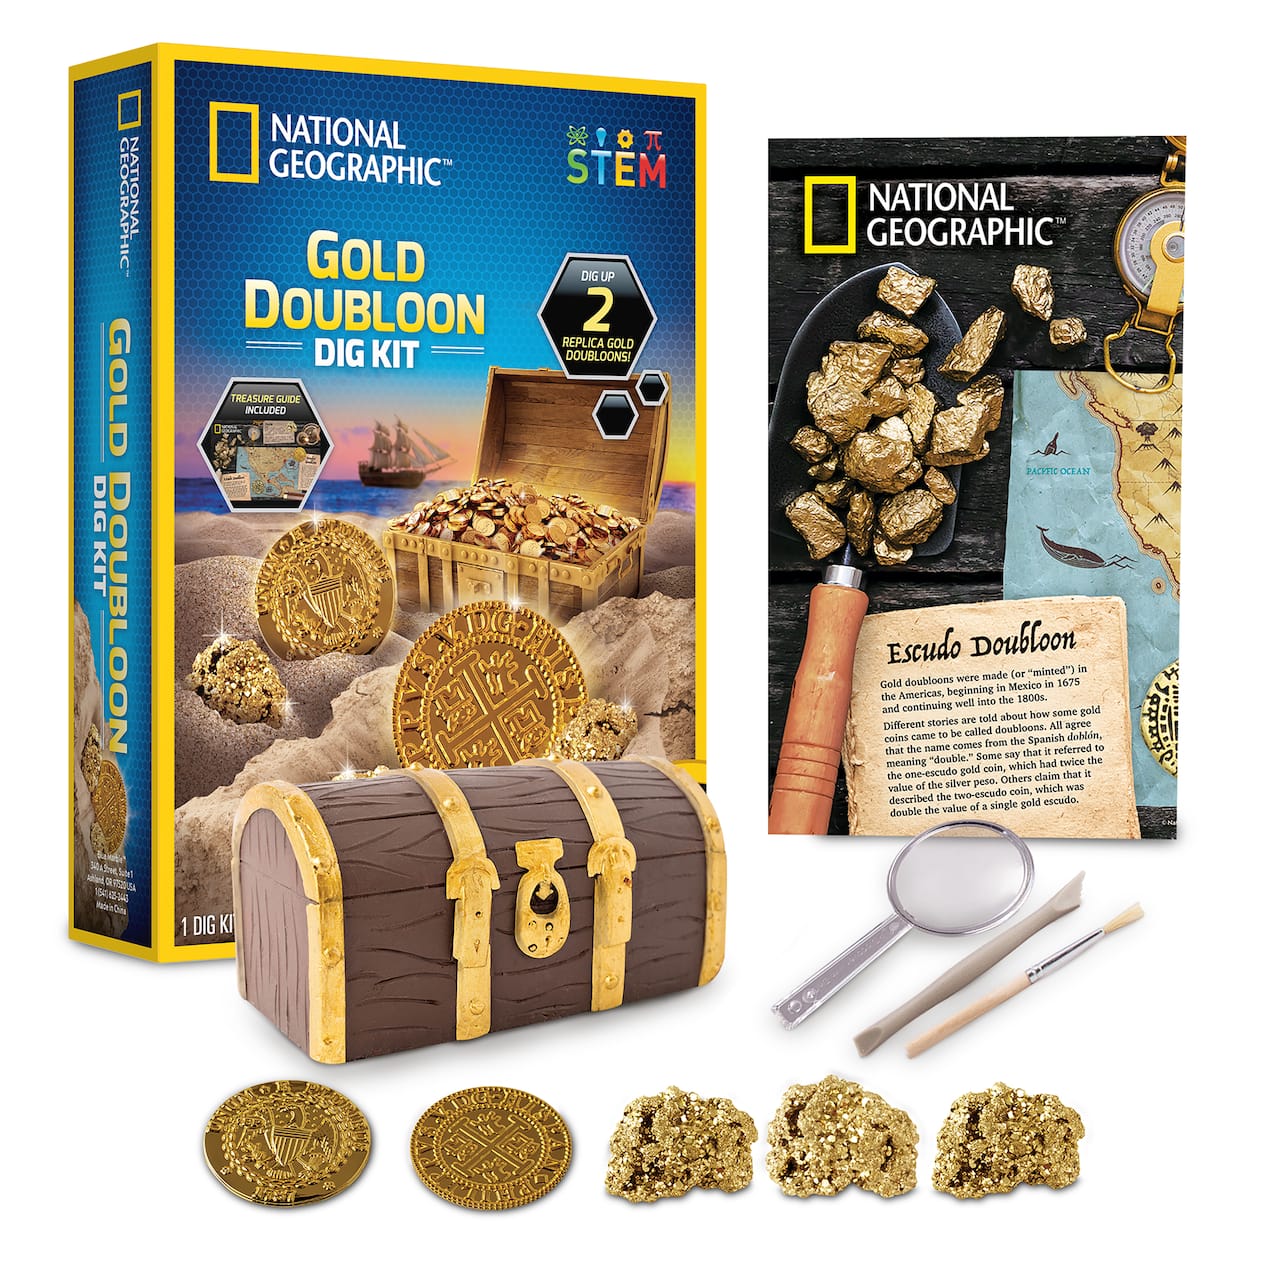 National Geographic ™ S.T.E.M. Gold Doubloon Dig Kit